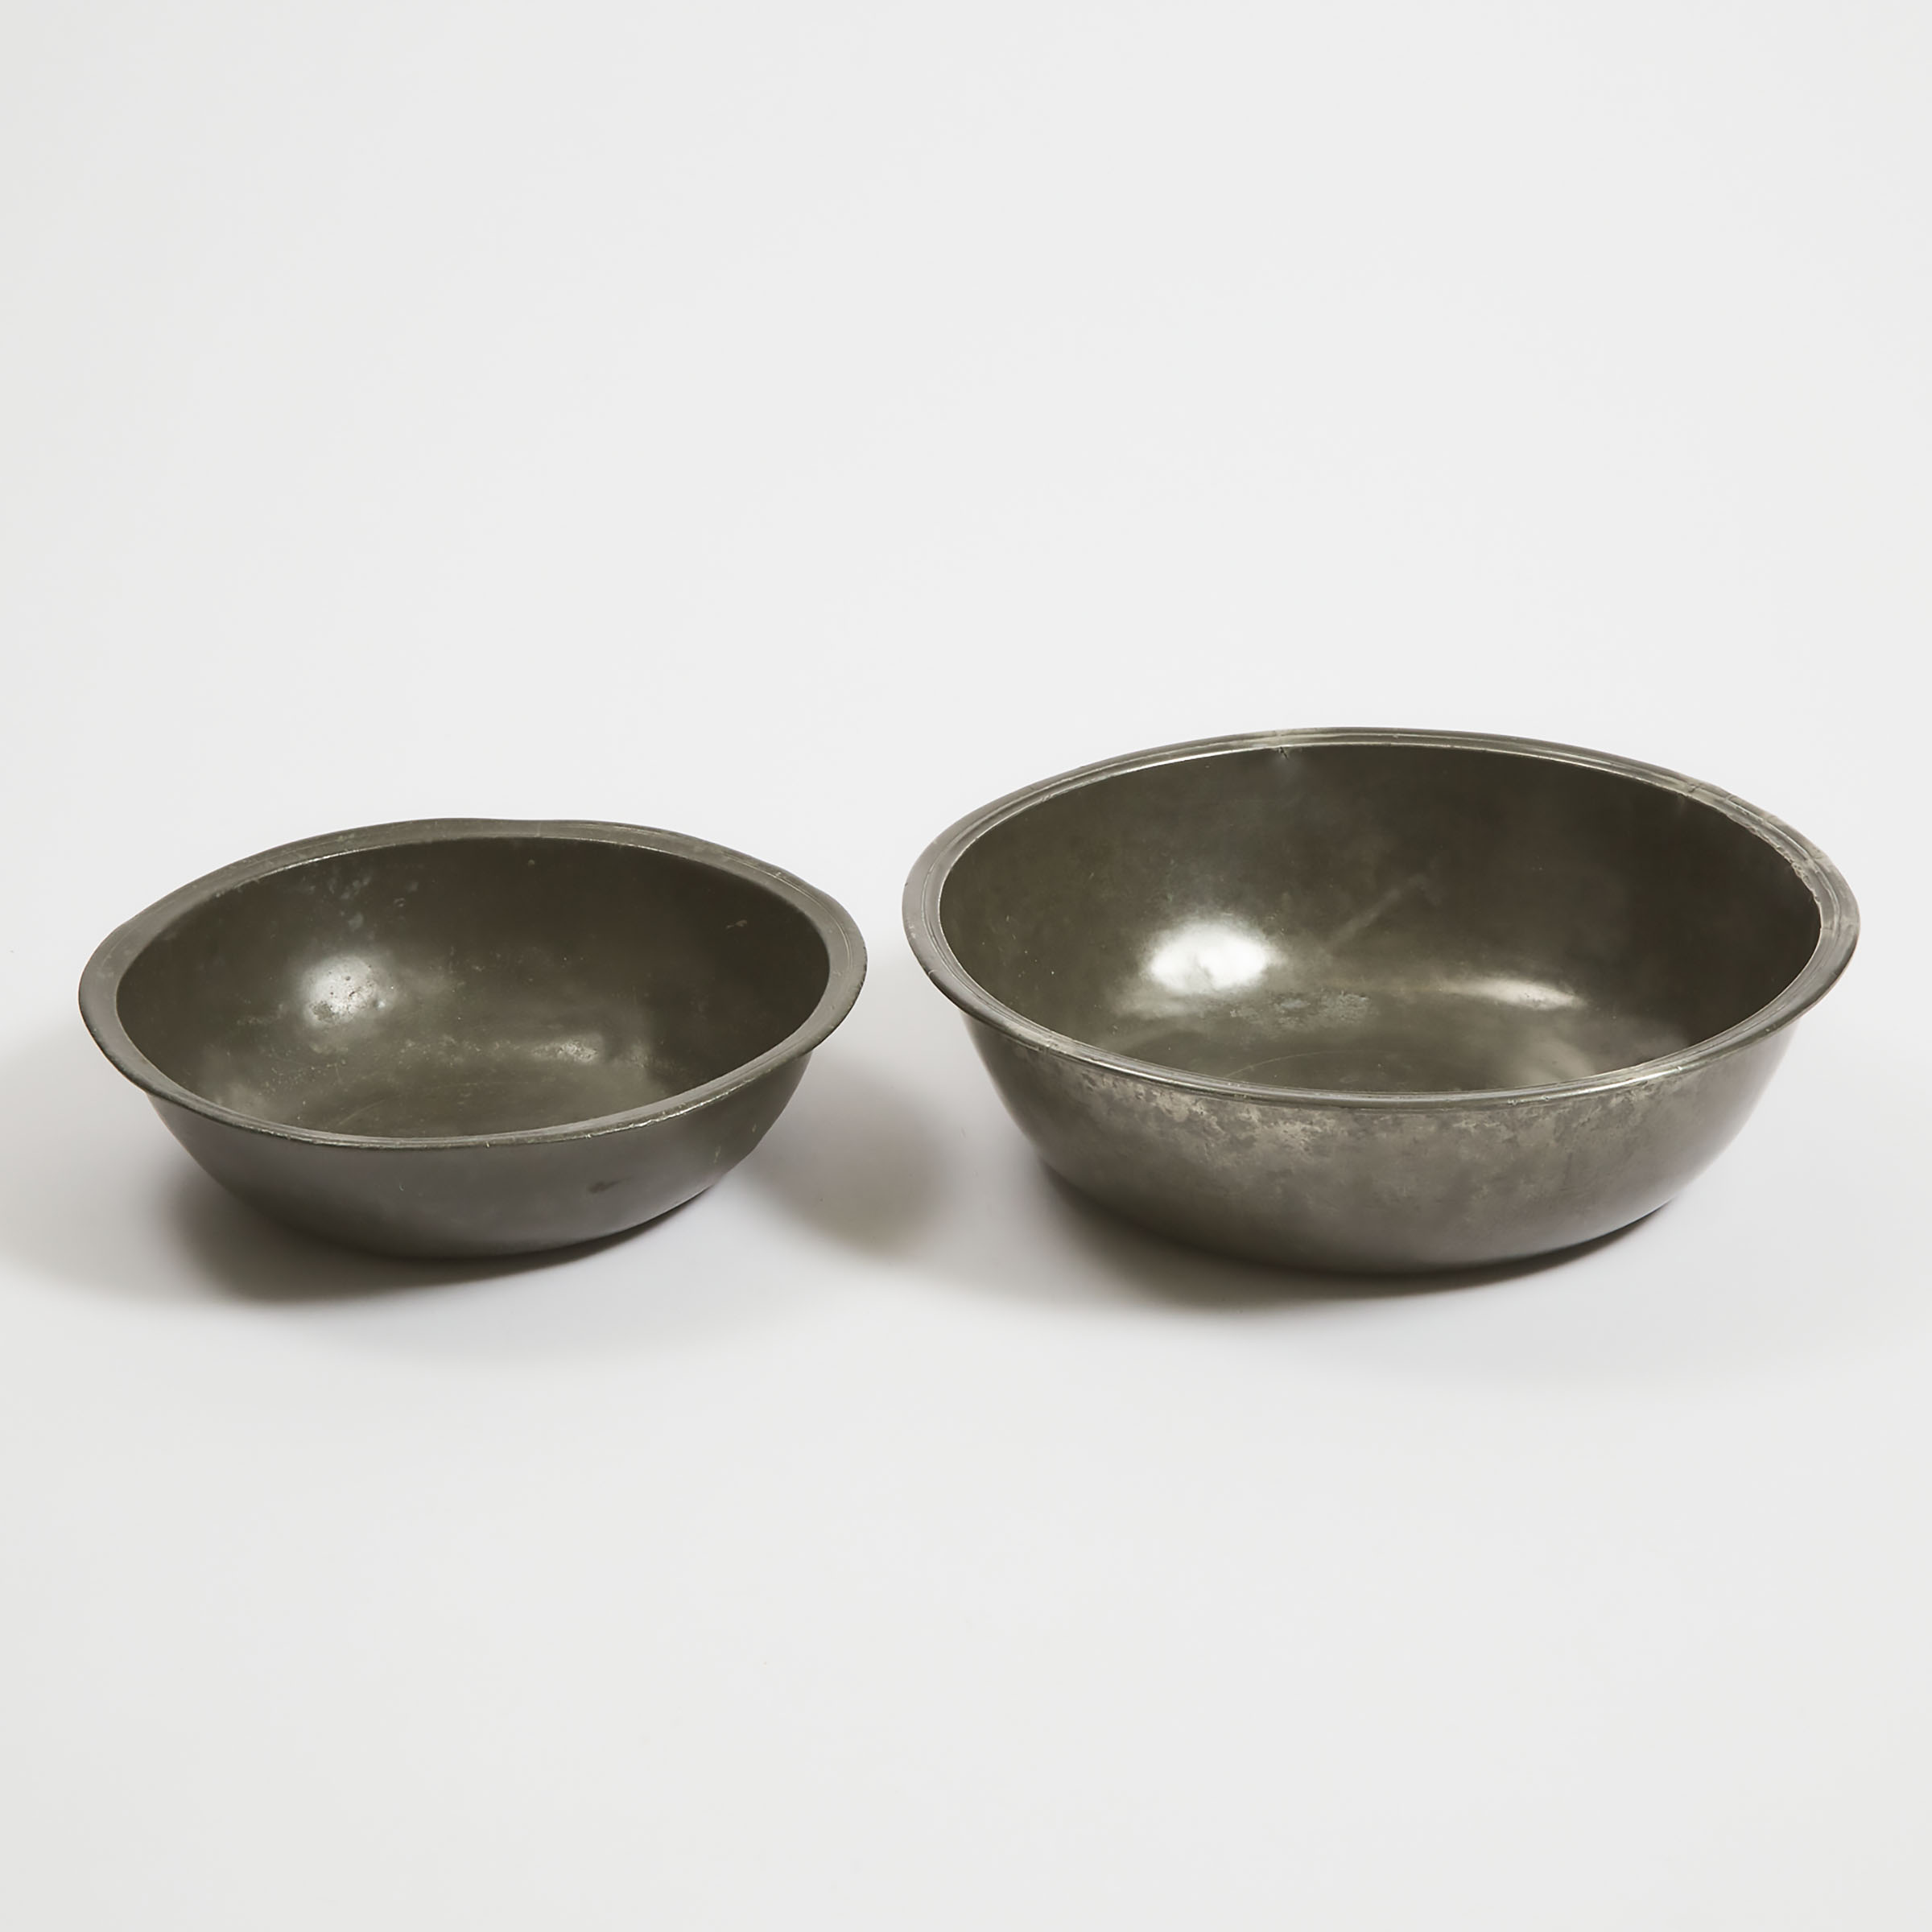 Two Scottish Pewter Bowls, Glasgow, 17th/early 18th centuries